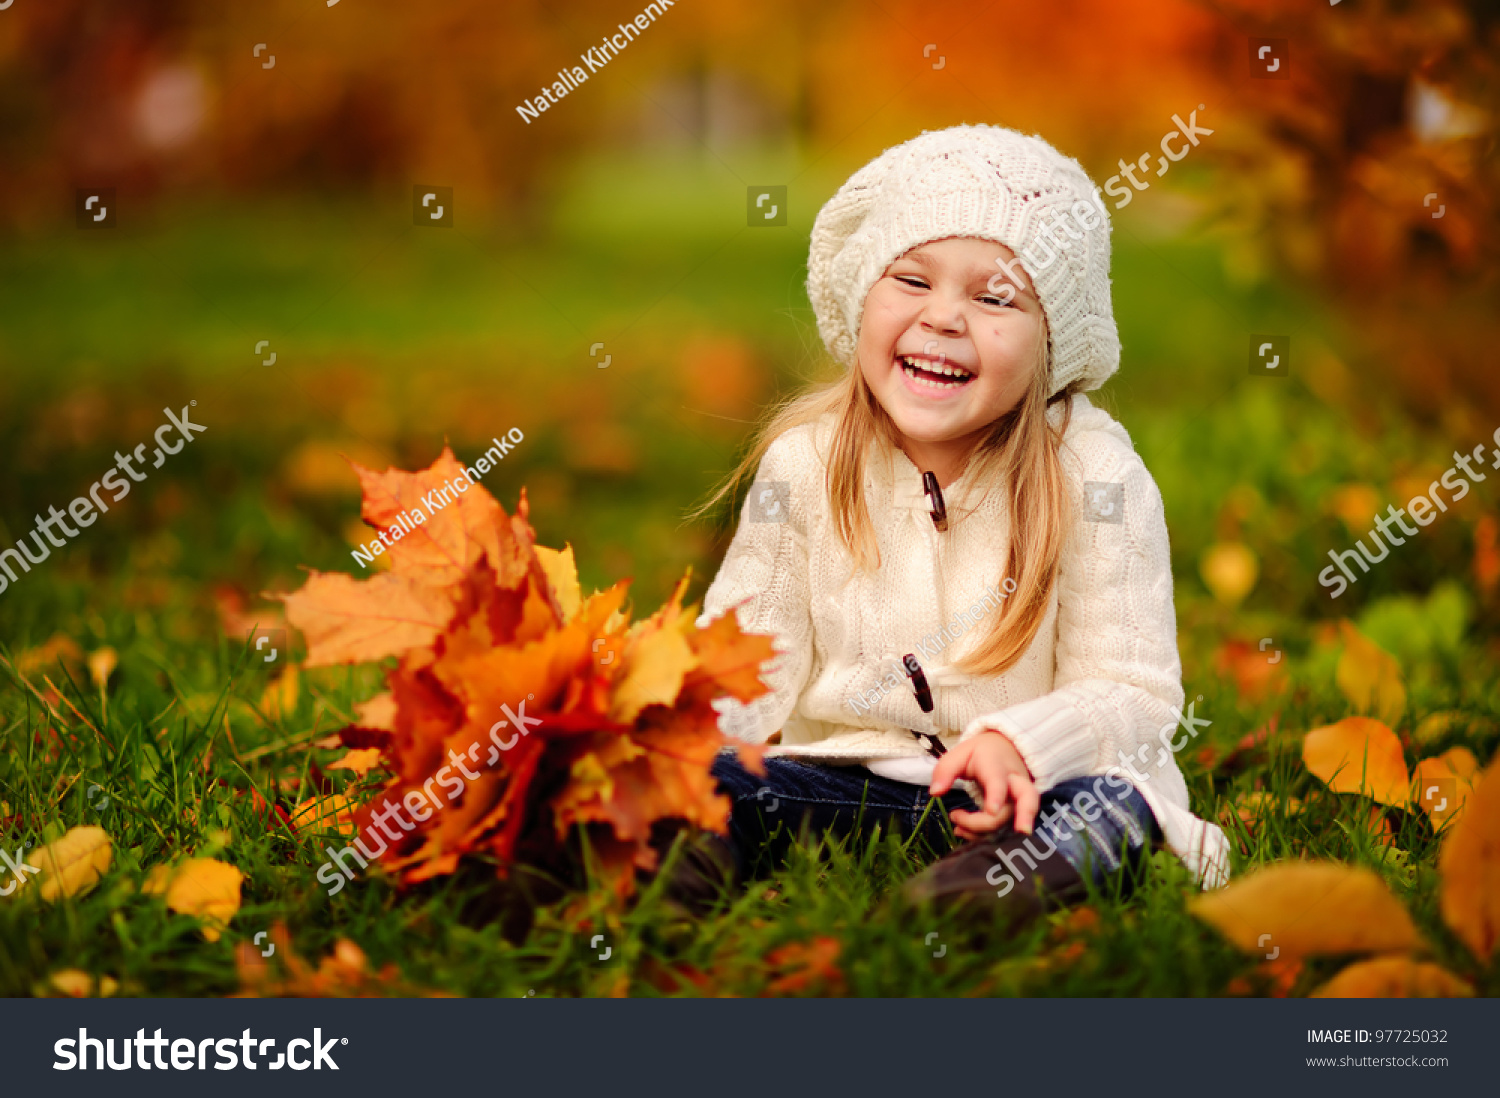 adorable little girl with autumn leaves in the beauty park #97725032